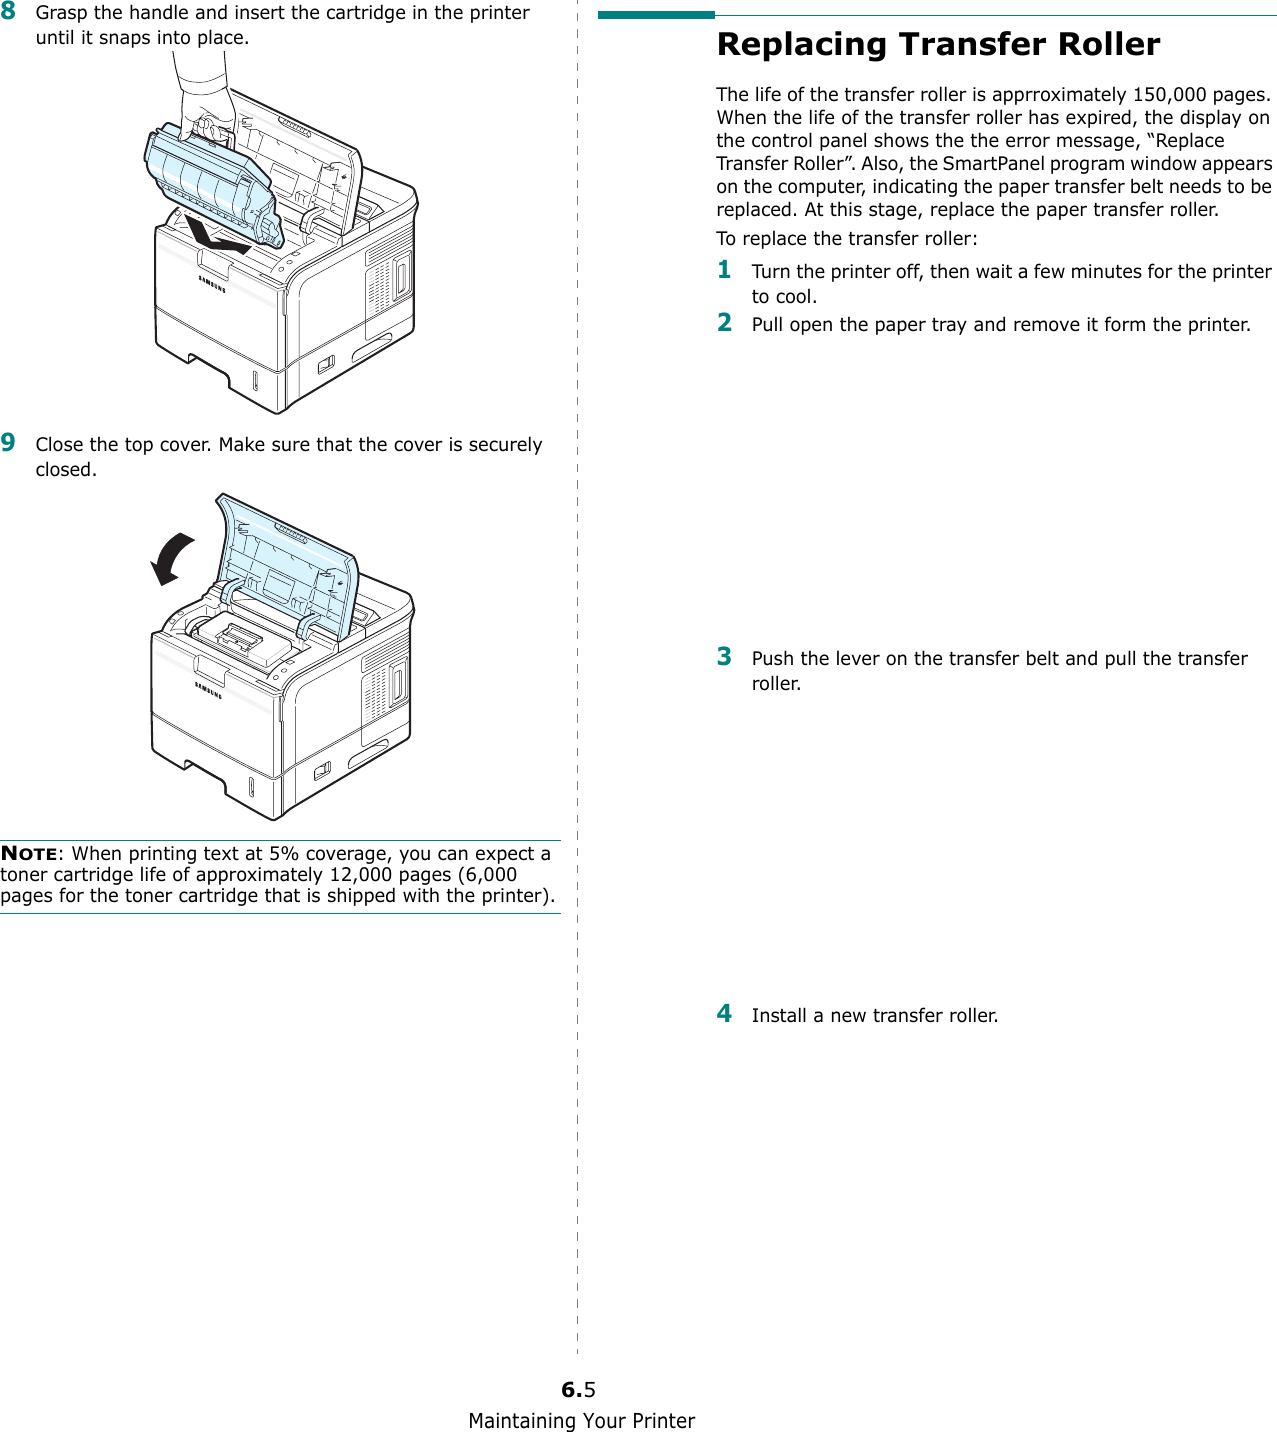 Maintaining Your Printer6.58Grasp the handle and insert the cartridge in the printer until it snaps into place.9Close the top cover. Make sure that the cover is securely closed.NOTE: When printing text at 5% coverage, you can expect a toner cartridge life of approximately 12,000 pages (6,000 pages for the toner cartridge that is shipped with the printer).Replacing Transfer RollerThe life of the transfer roller is apprroximately 150,000 pages. When the life of the transfer roller has expired, the display on the control panel shows the the error message, “Replace Transfer Roller”. Also, the SmartPanel program window appears on the computer, indicating the paper transfer belt needs to be replaced. At this stage, replace the paper transfer roller.To replace the transfer roller:1Turn the printer off, then wait a few minutes for the printer to cool.2Pull open the paper tray and remove it form the printer.3Push the lever on the transfer belt and pull the transfer roller. 4Install a new transfer roller.